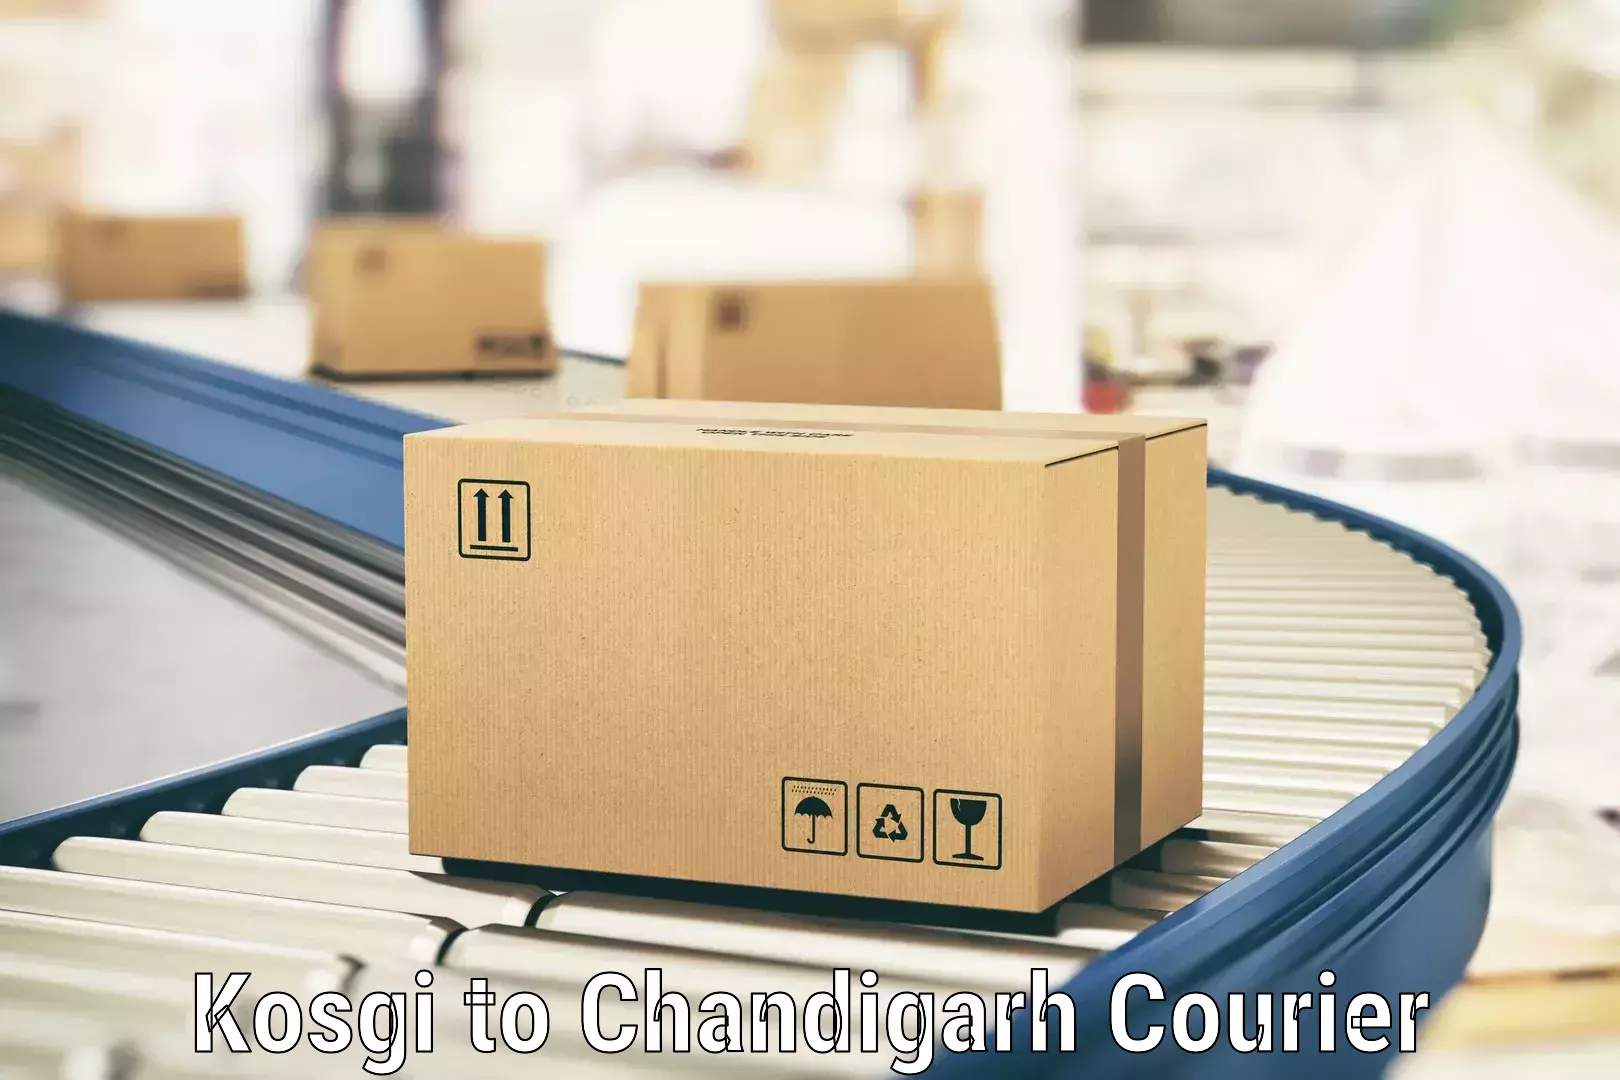 Sustainable shipping practices Kosgi to Chandigarh